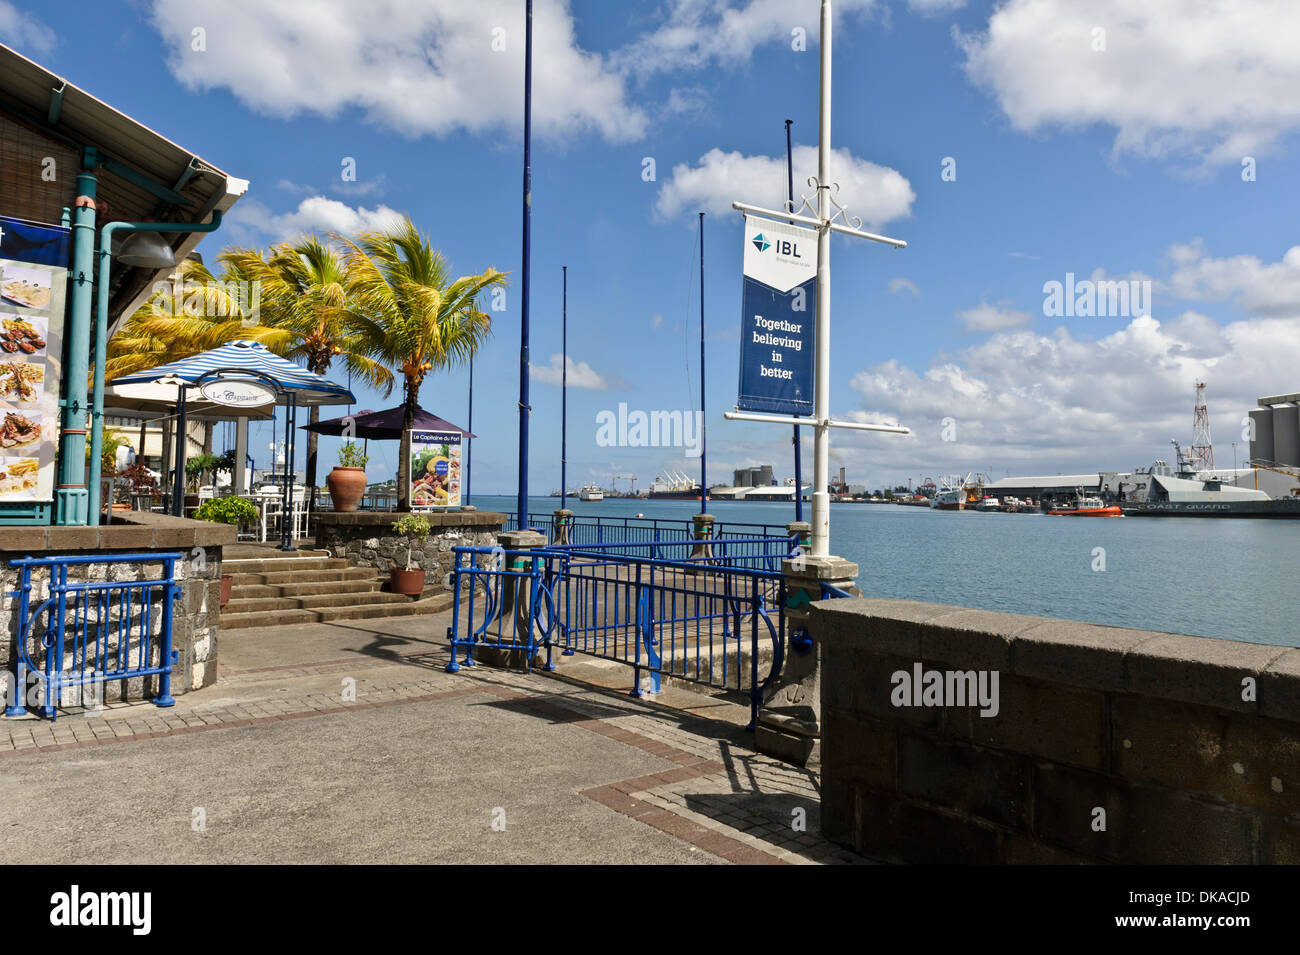 Caudan Waterfront with restaurants and bars, Port Louis, Mauritius. Stock Photo